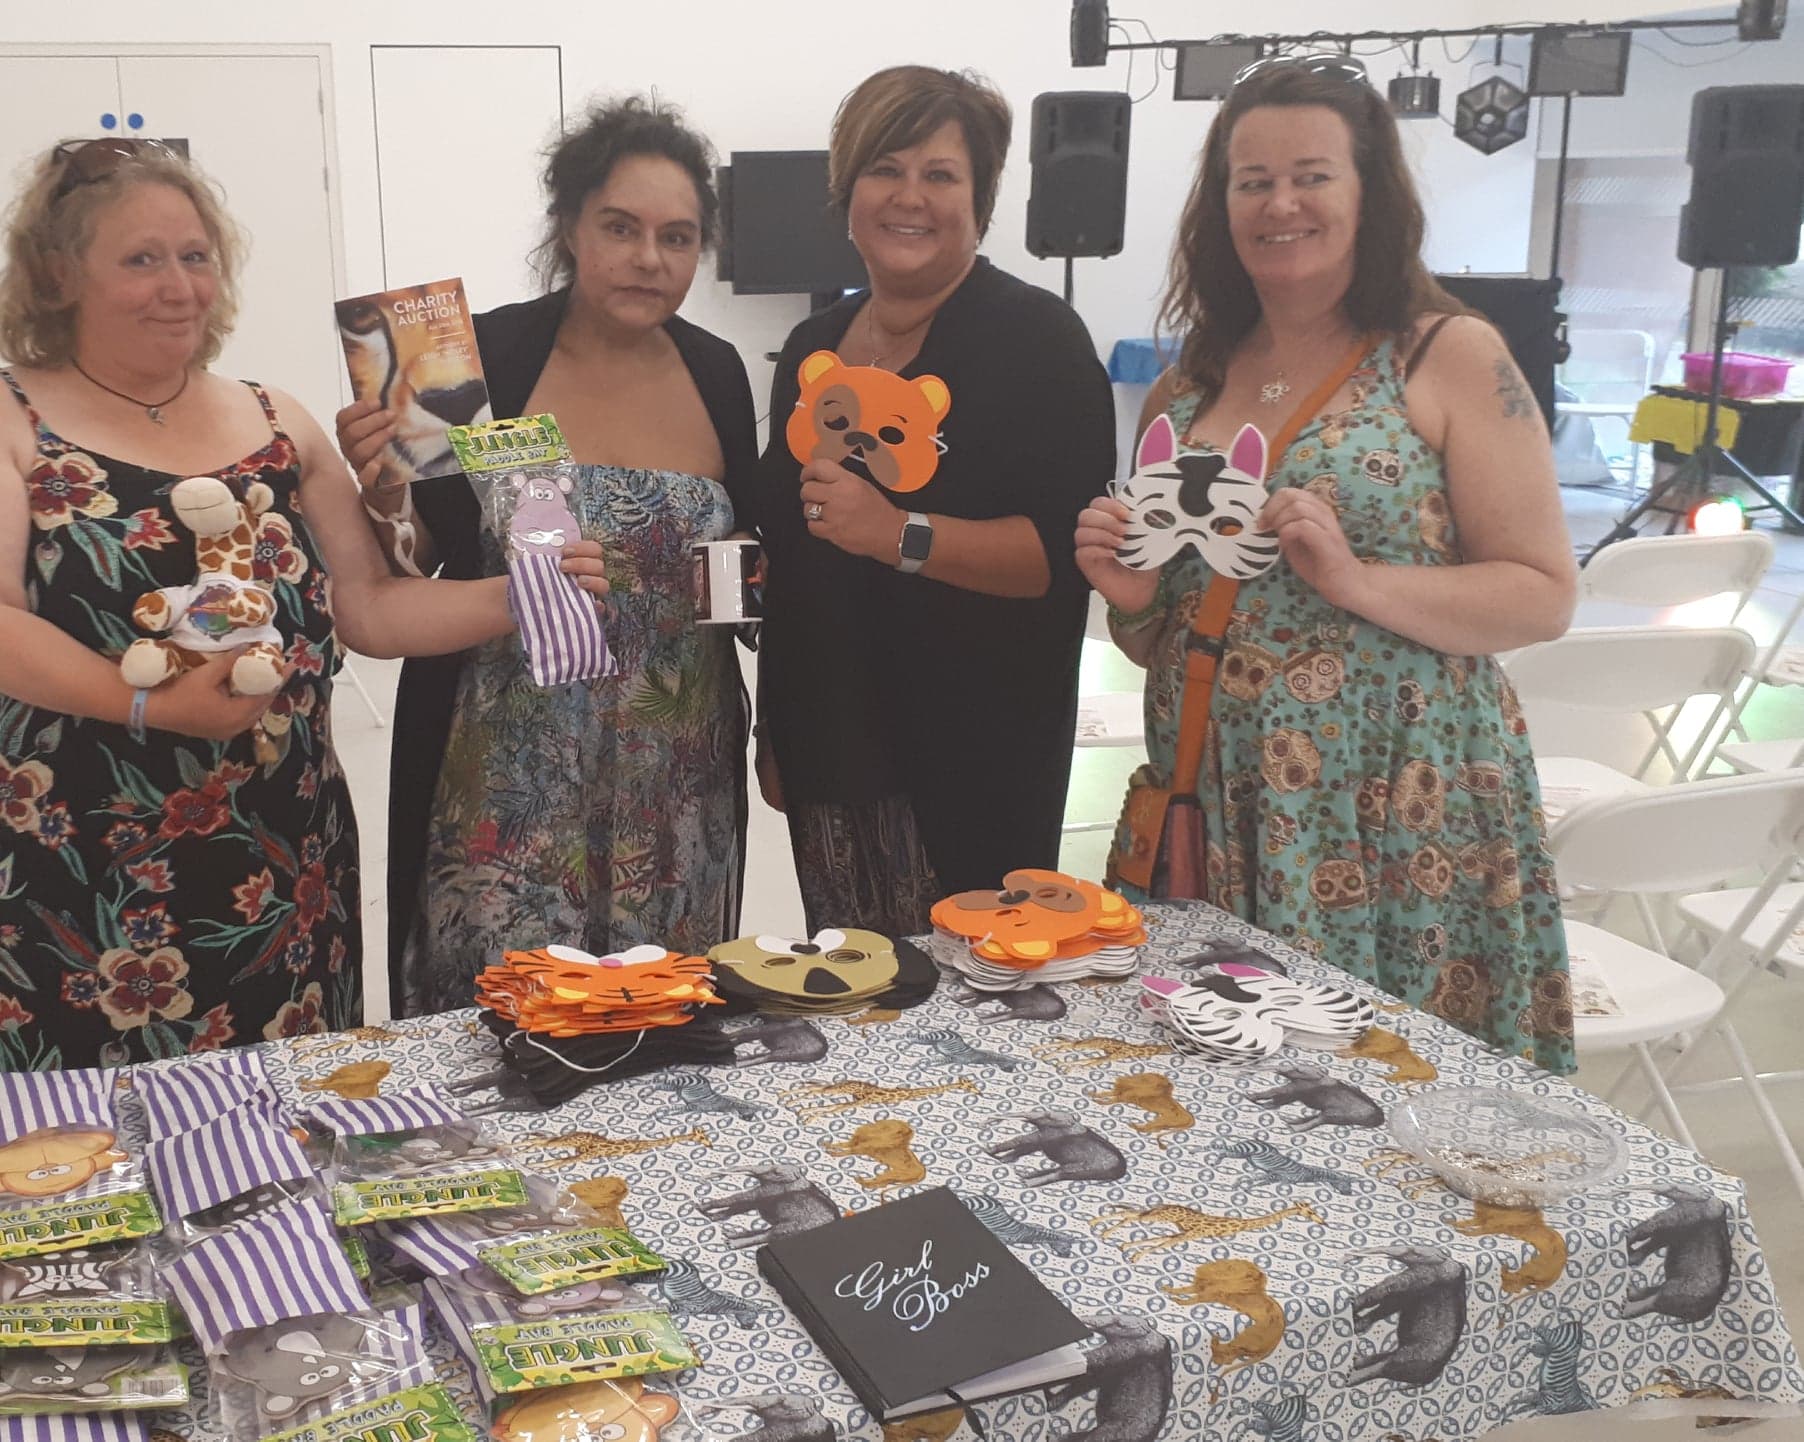 owap ar event fundraiser colchester uk 20 july 2018 with sue abi ellie and kim.jpg